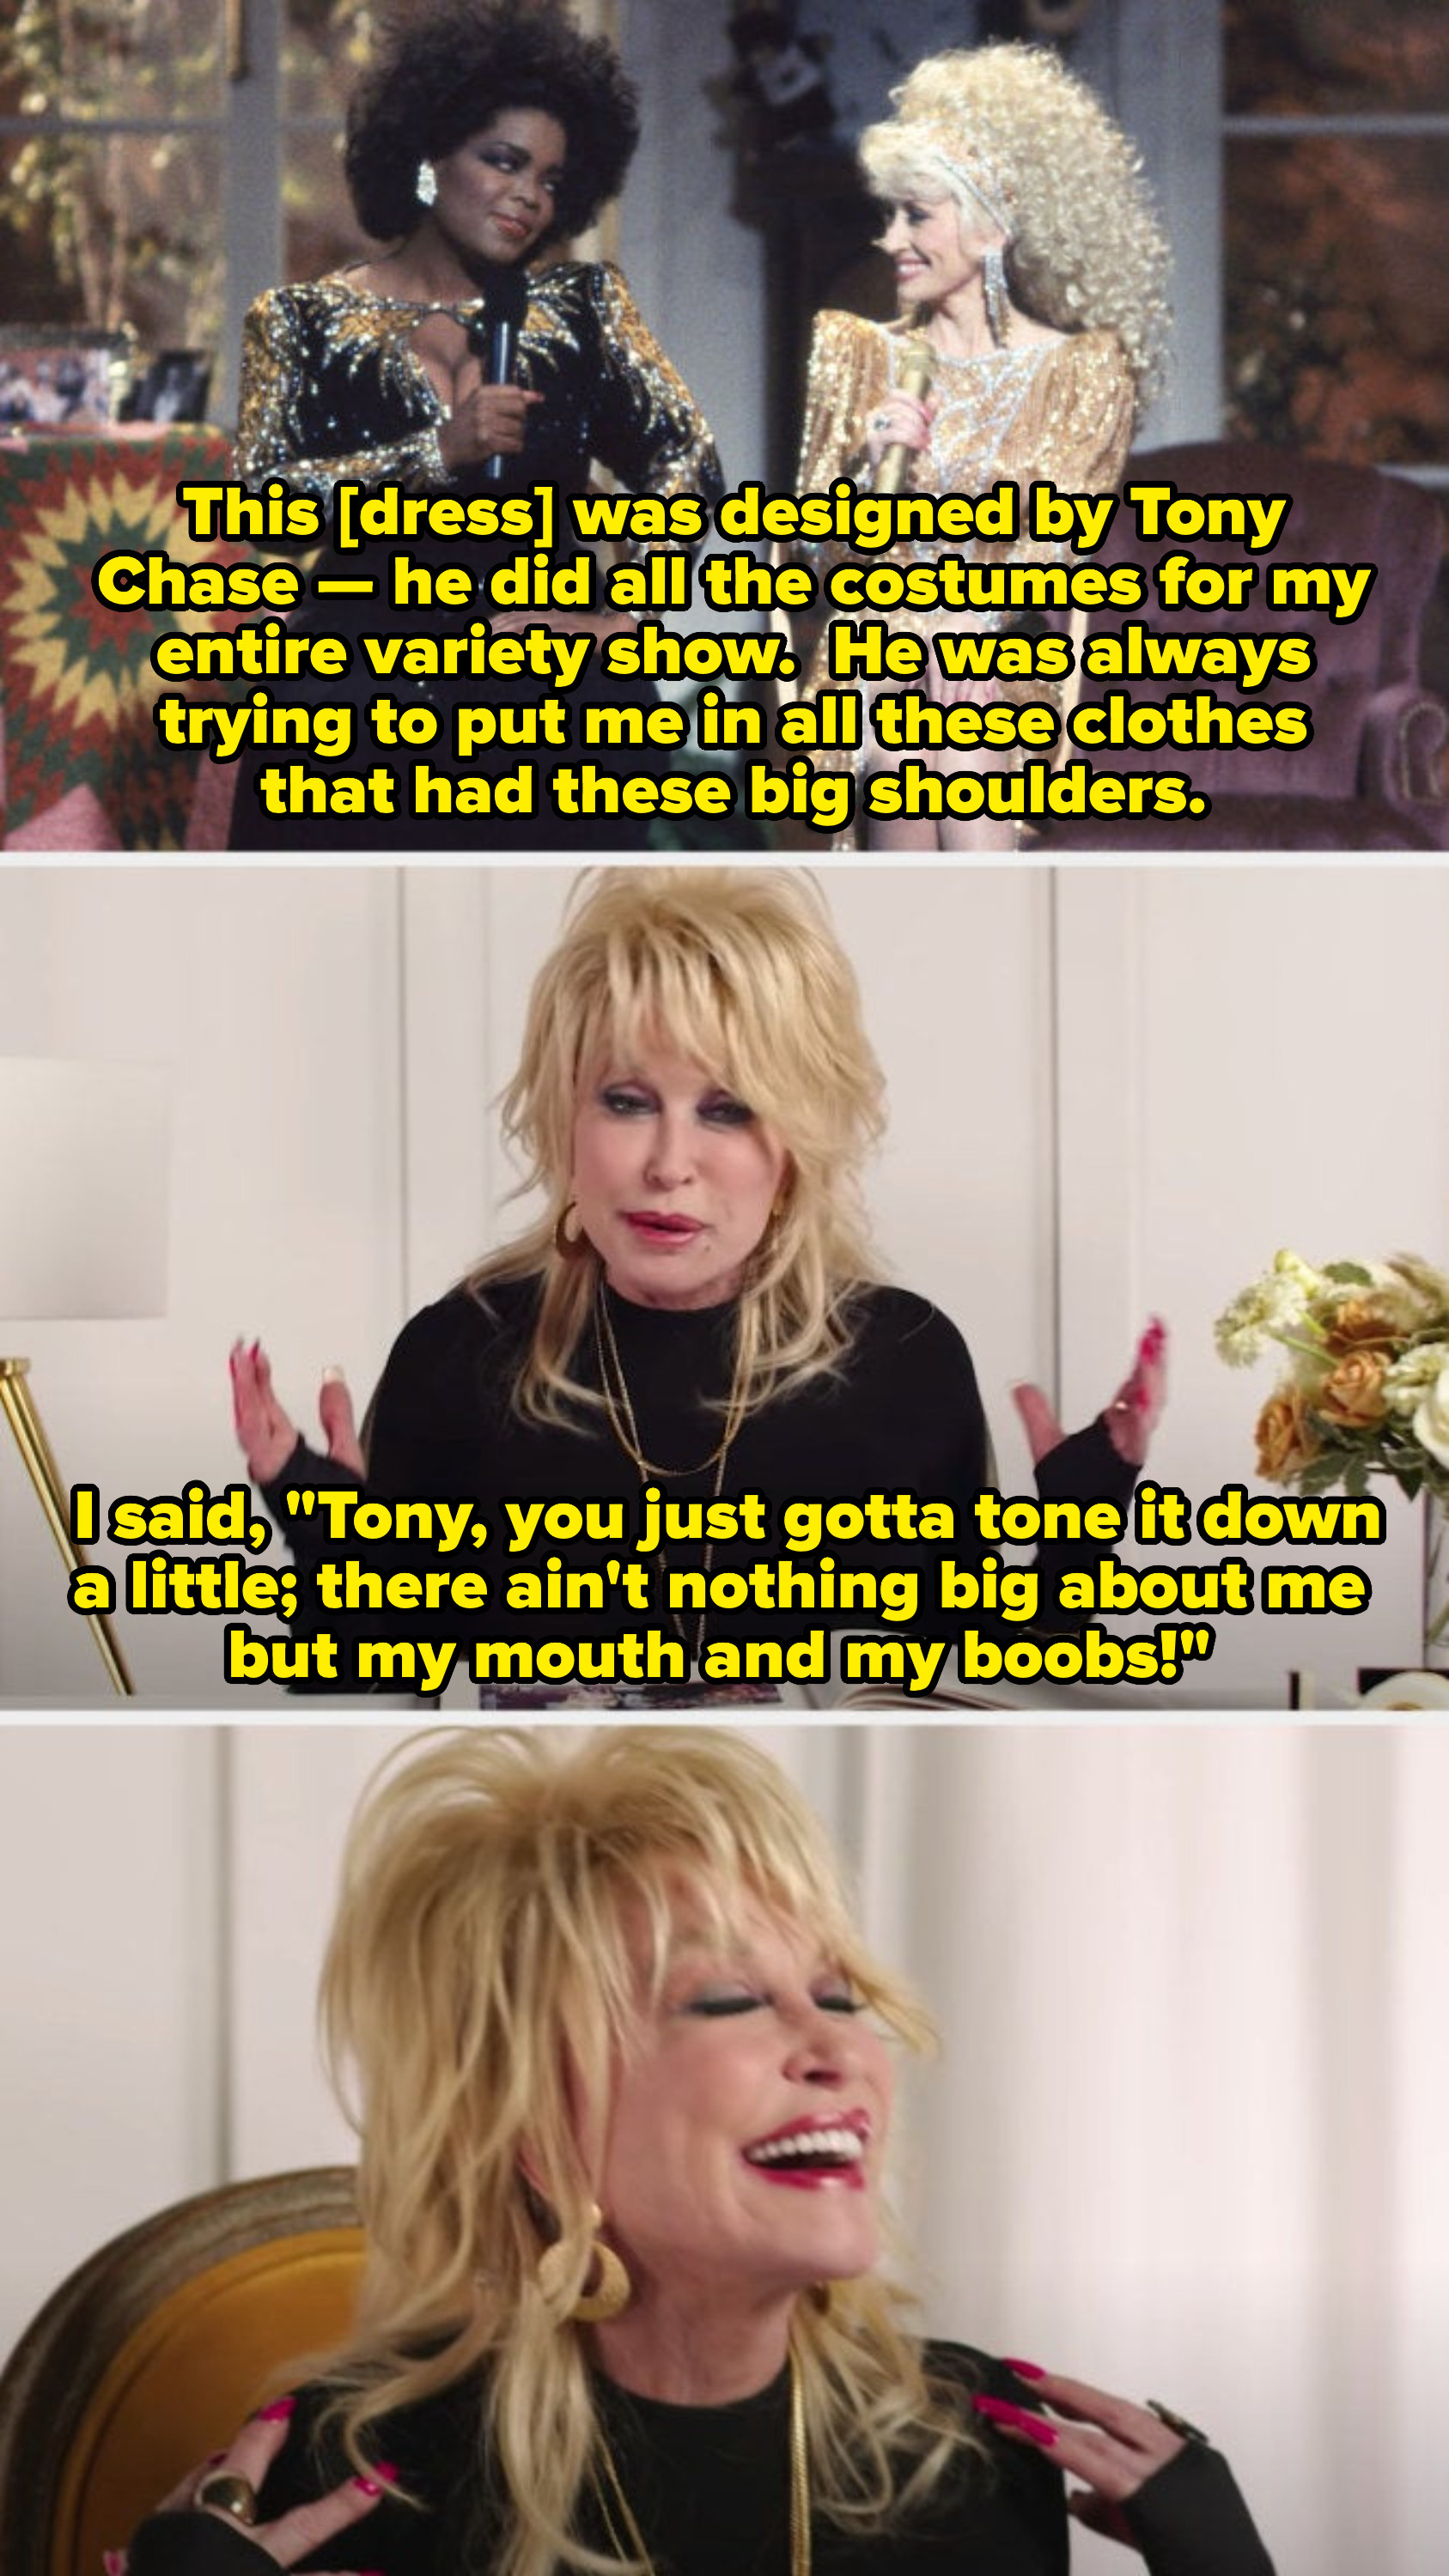 Dolly: &quot;I said [to my designer], &#x27;You just gotta tone it down a little; there ain&#x27;t nothing big about me but my mouth and my boobs!&#x27;&quot;